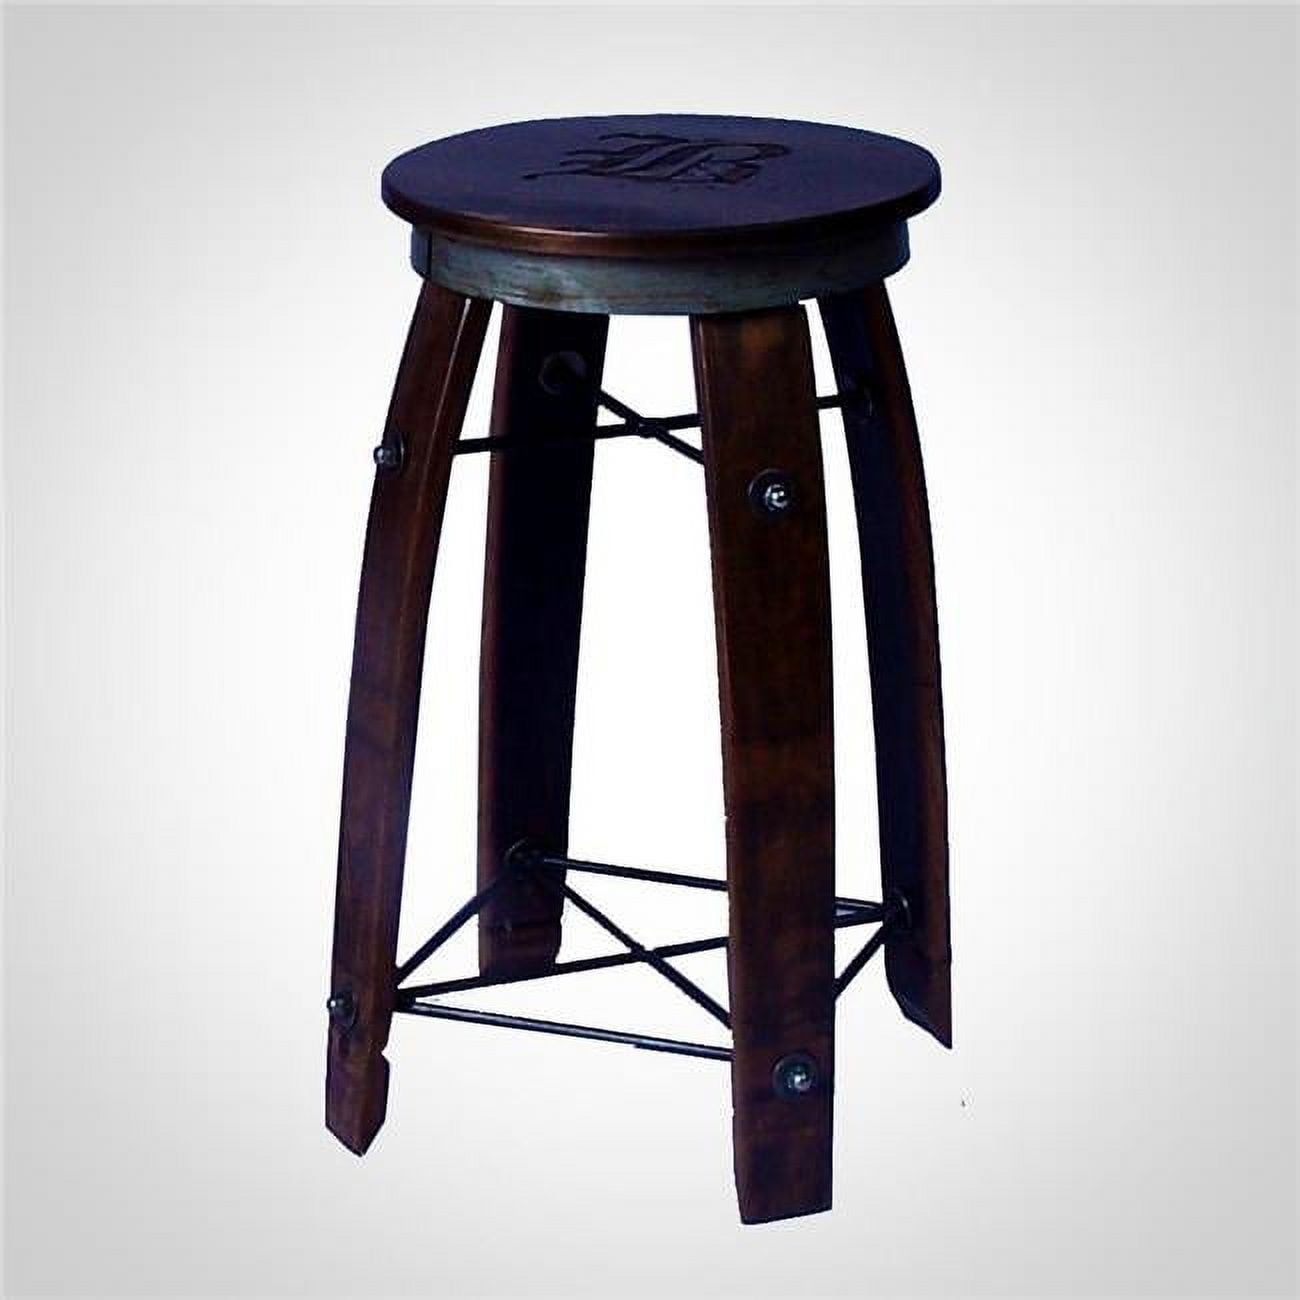 Picture of 2 Day Designs 197-26 26 in. Daisy Stave Stool